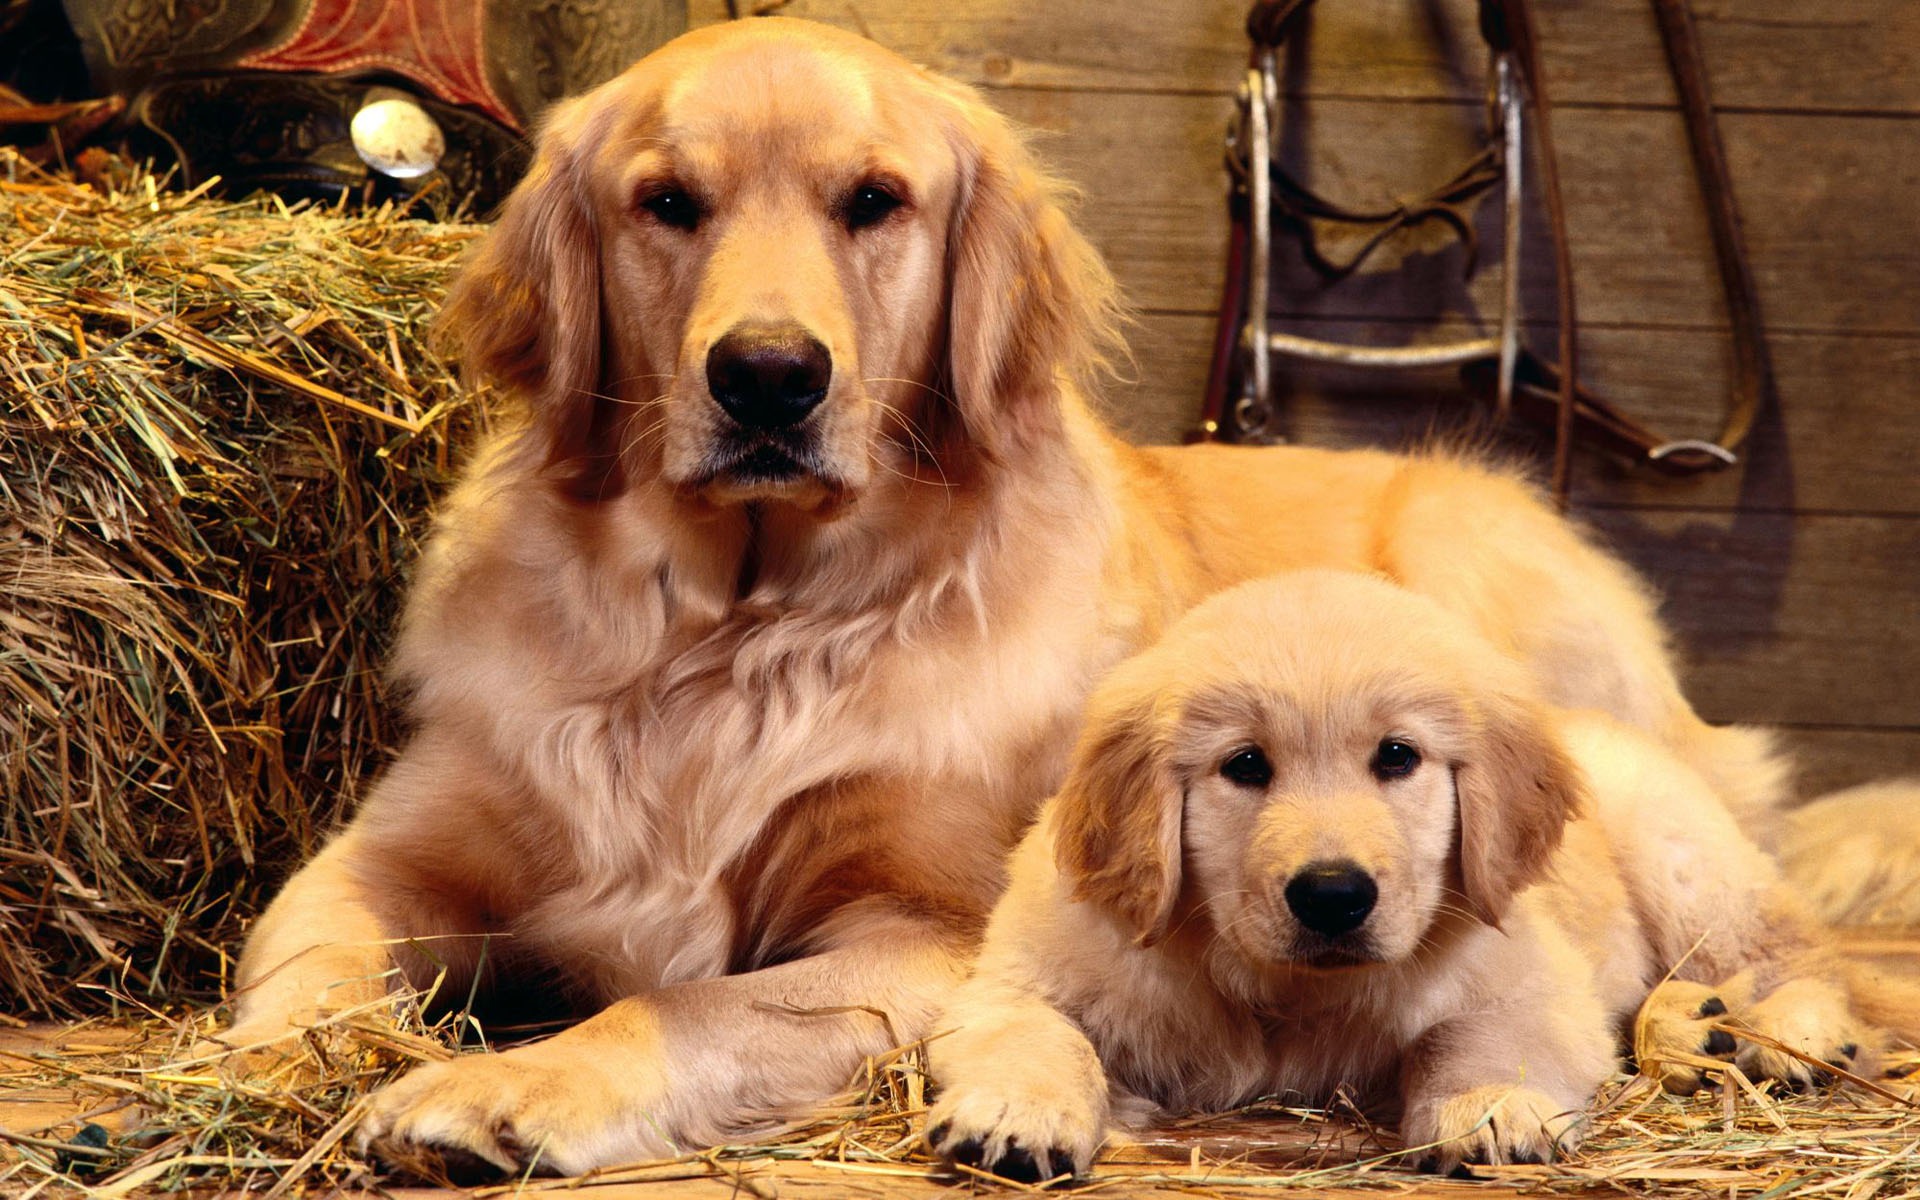 Puppy Photo HD wallpapers (2) #5 - 1920x1200